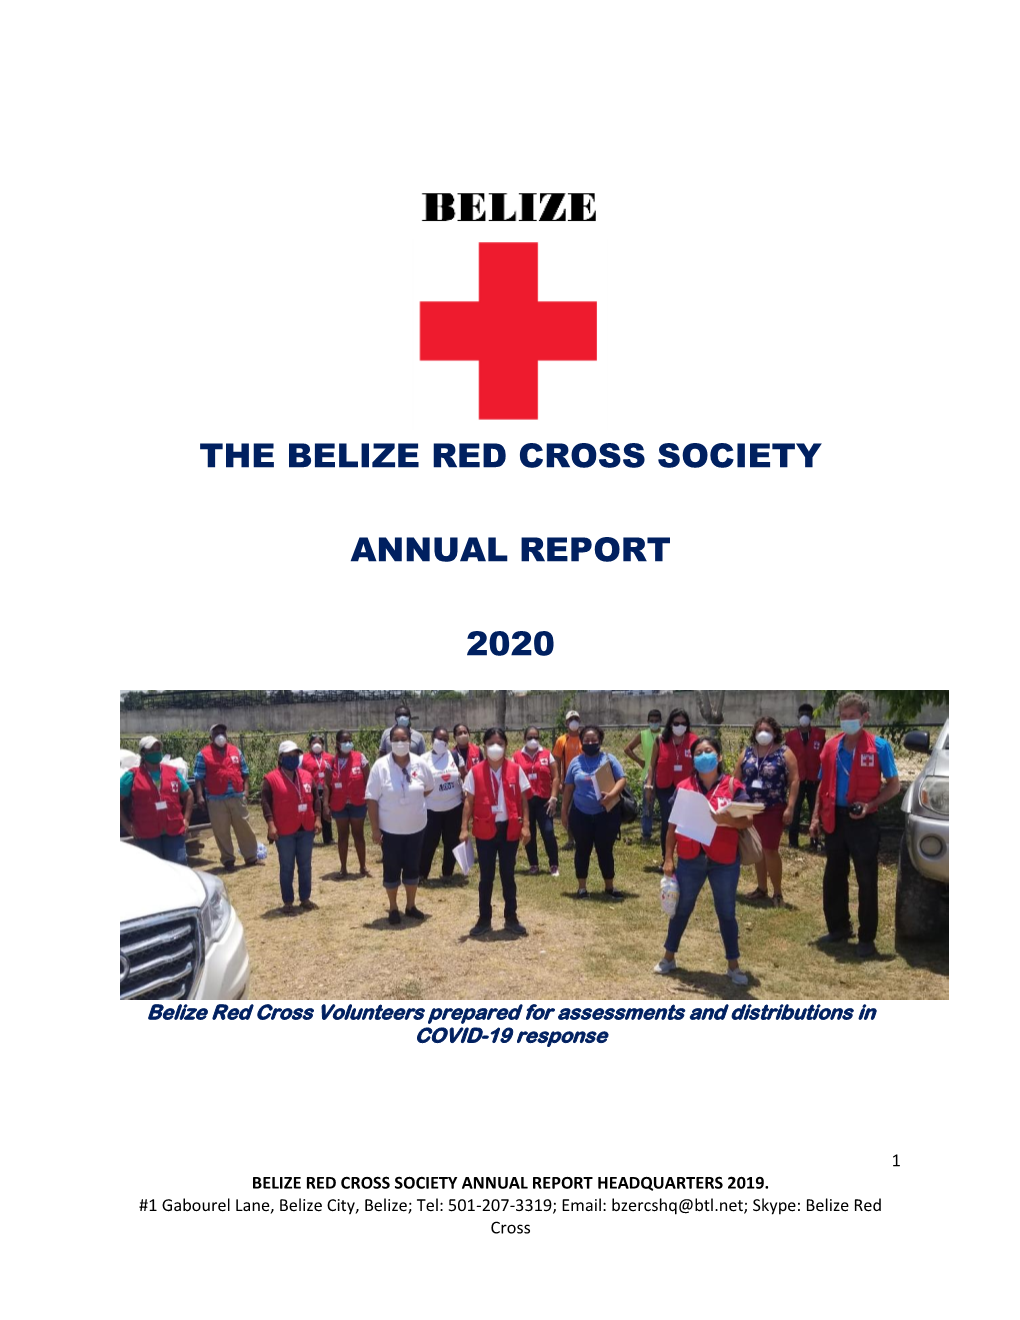 The Belize Red Cross Society Annual Report 2020